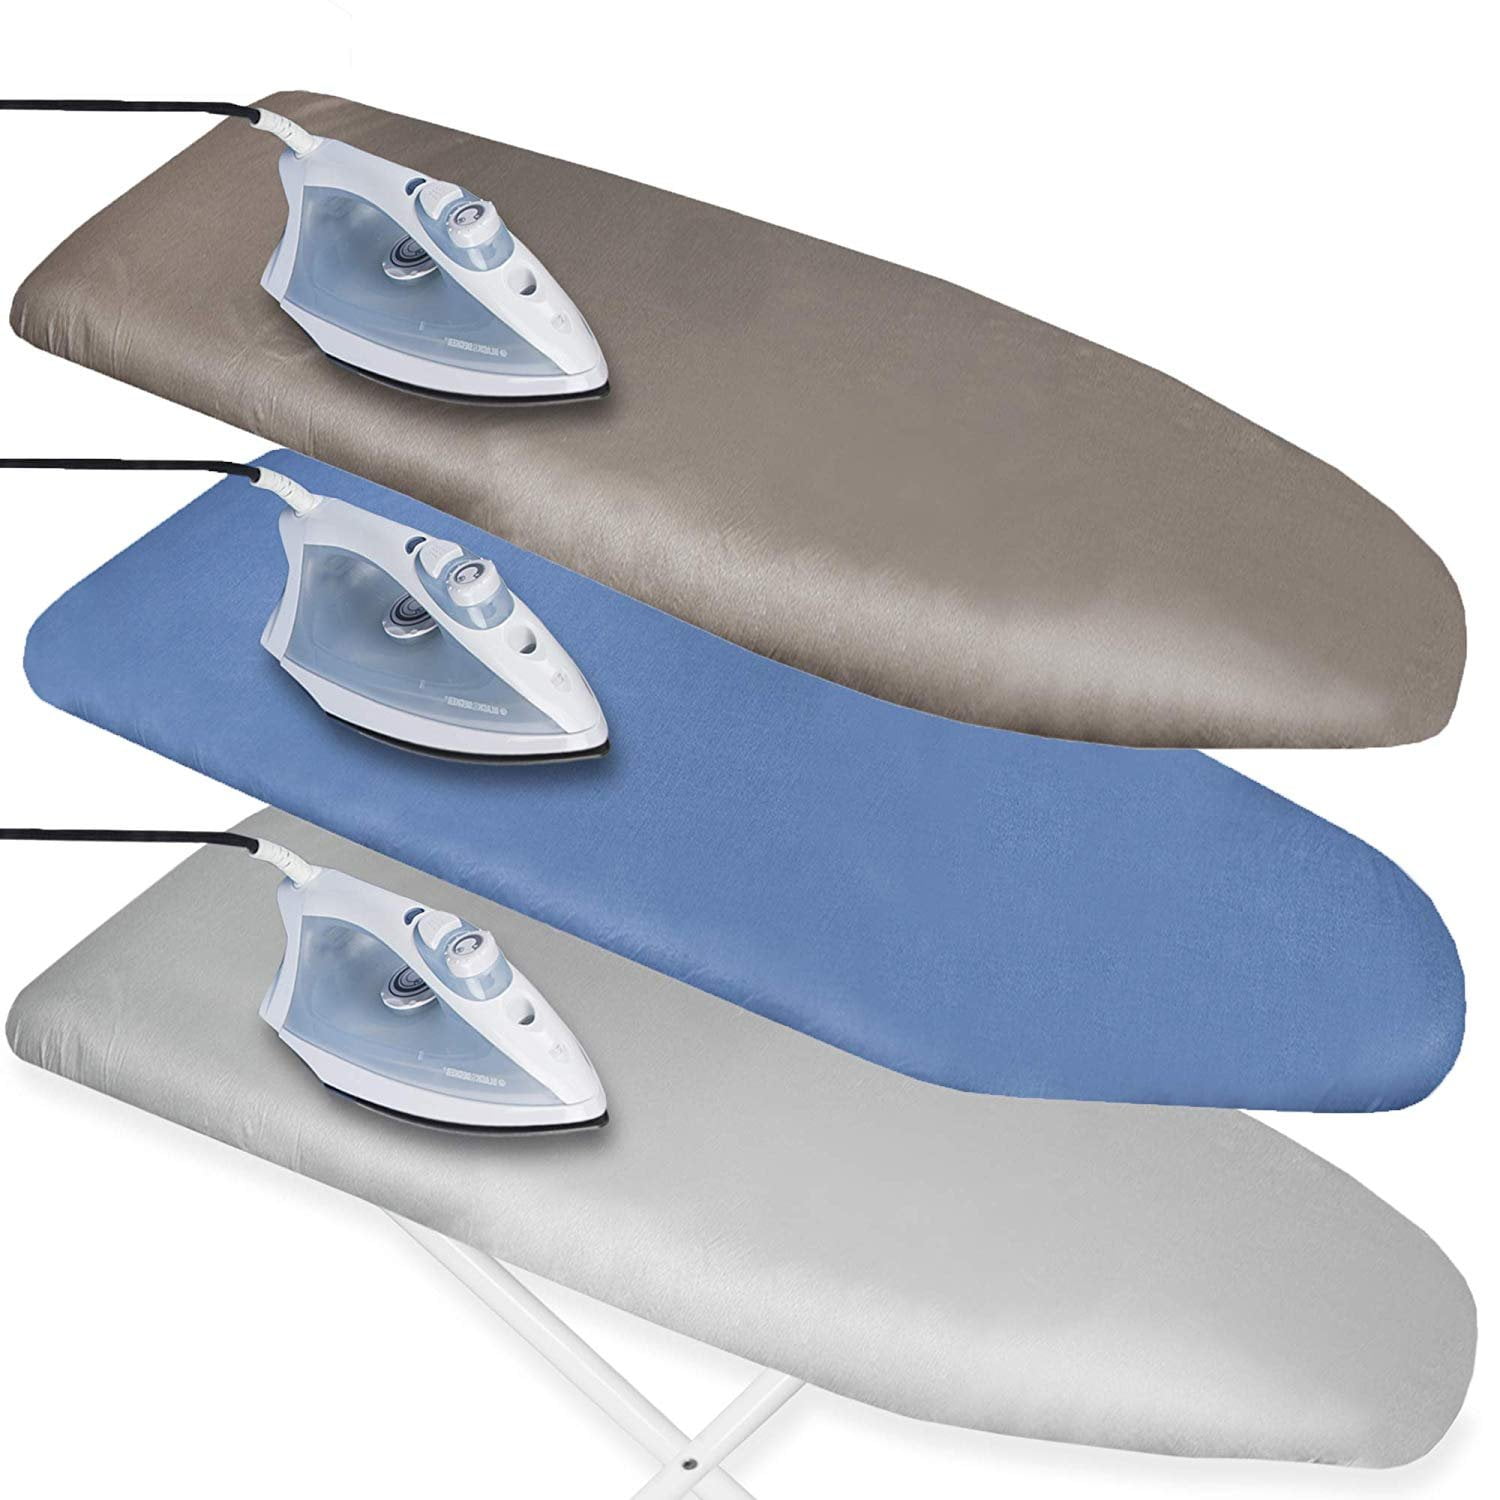 18" x 54" ironing board cover Metallic heat-reflective scorch resistant coating 